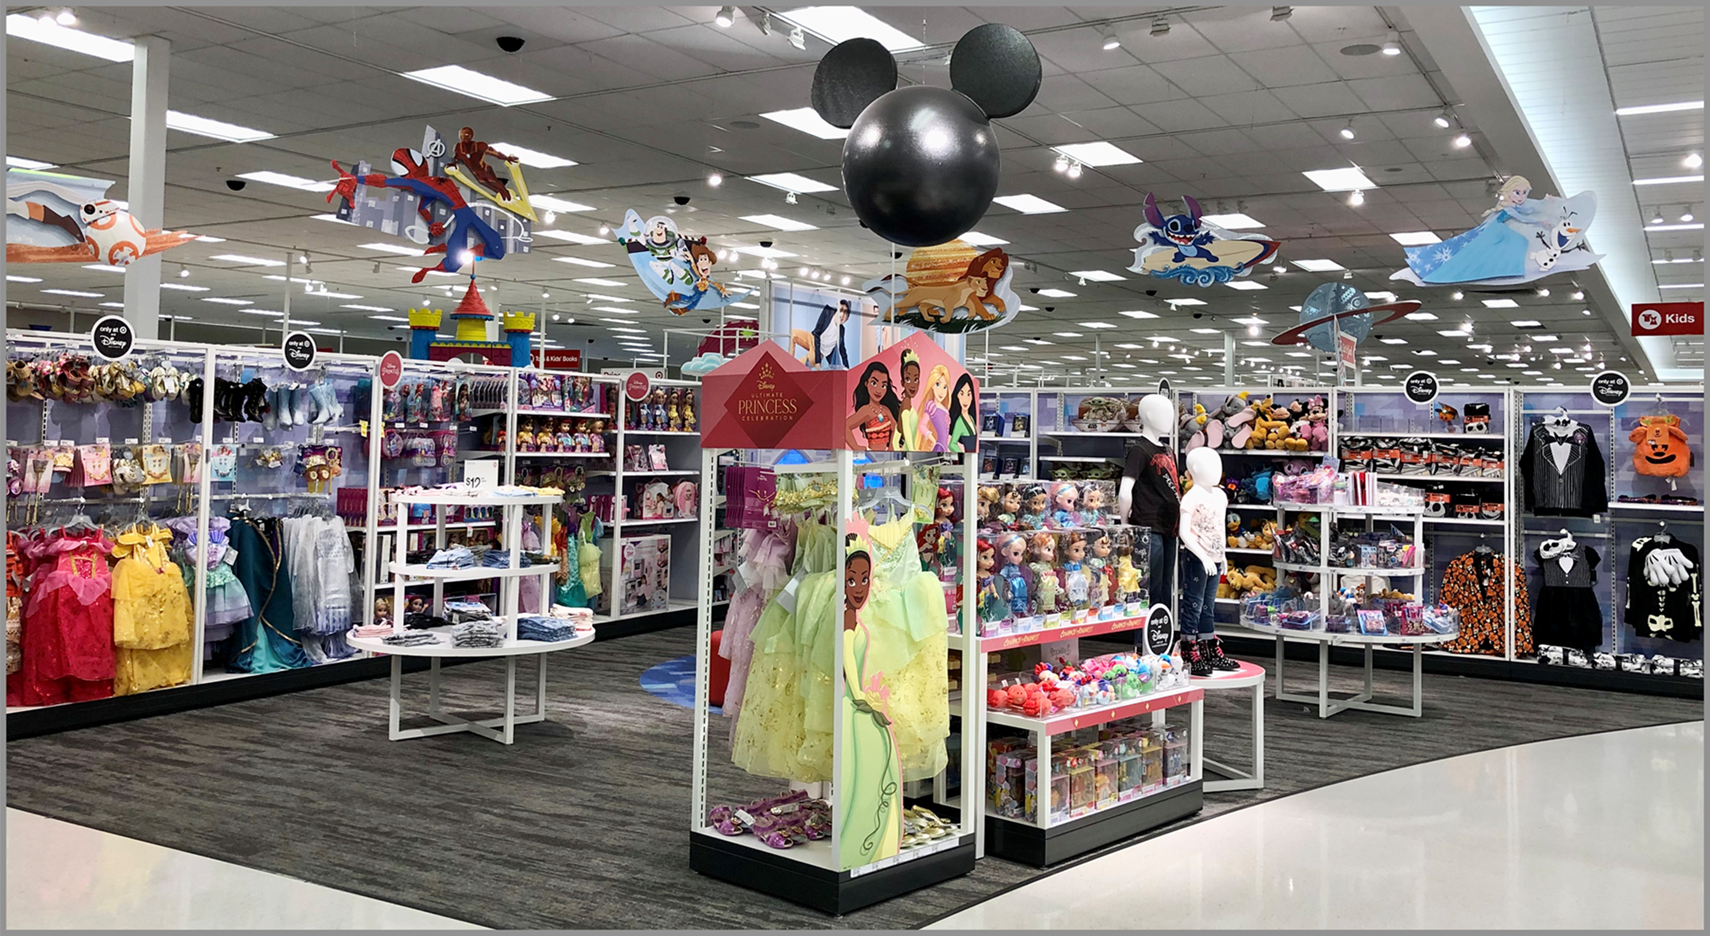 An image of a Disney store at Target shop-in-shop.